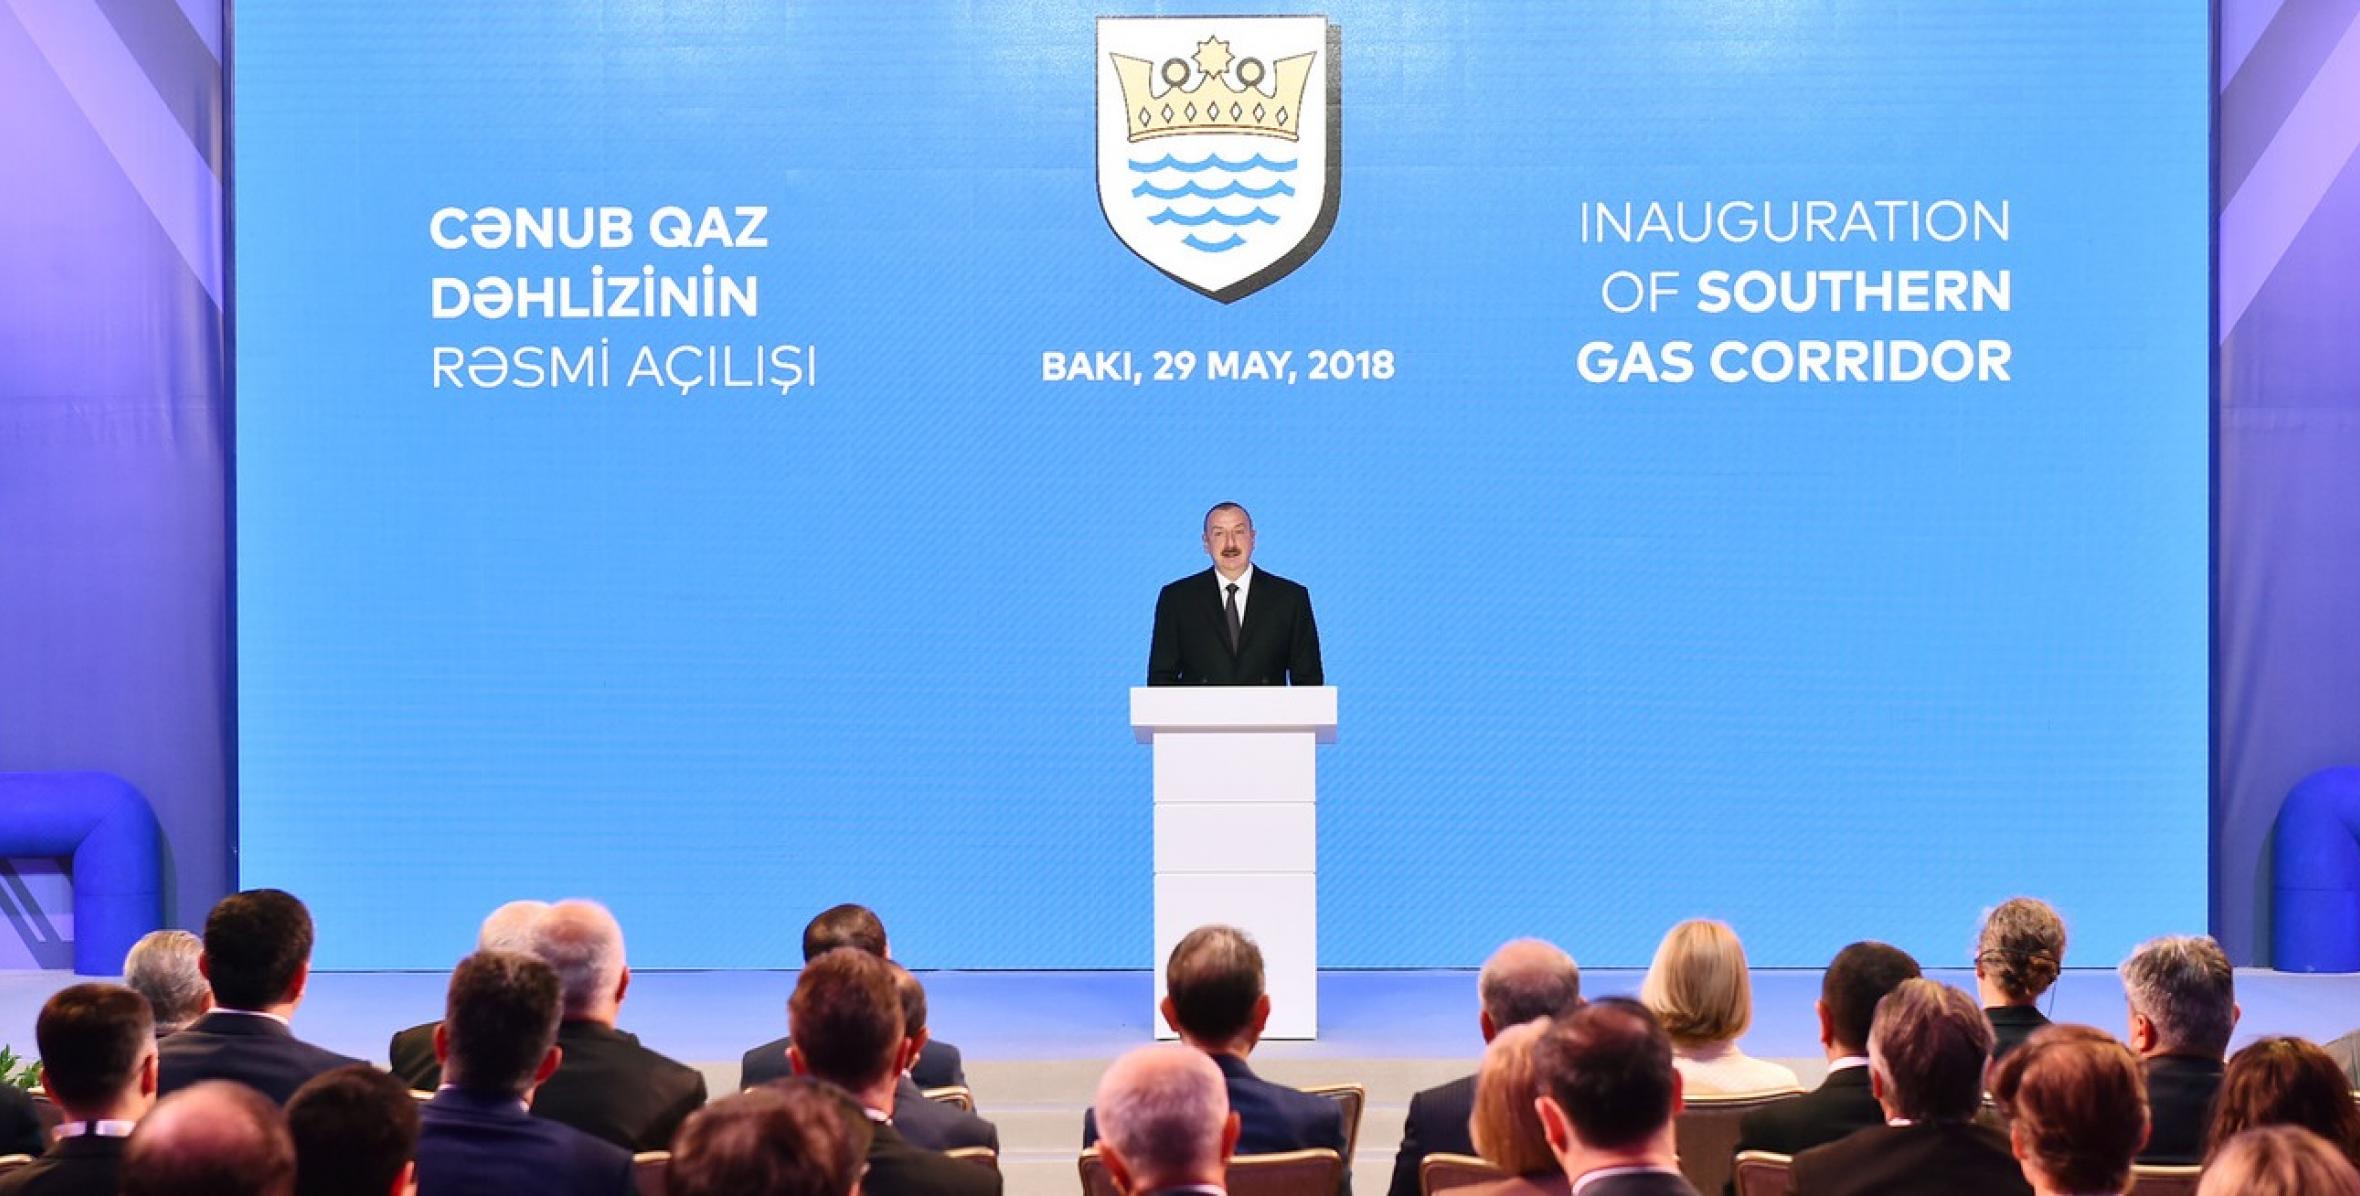 Speech by Ilham Aliyev at the official opening ceremony of Southern Gas Corridor